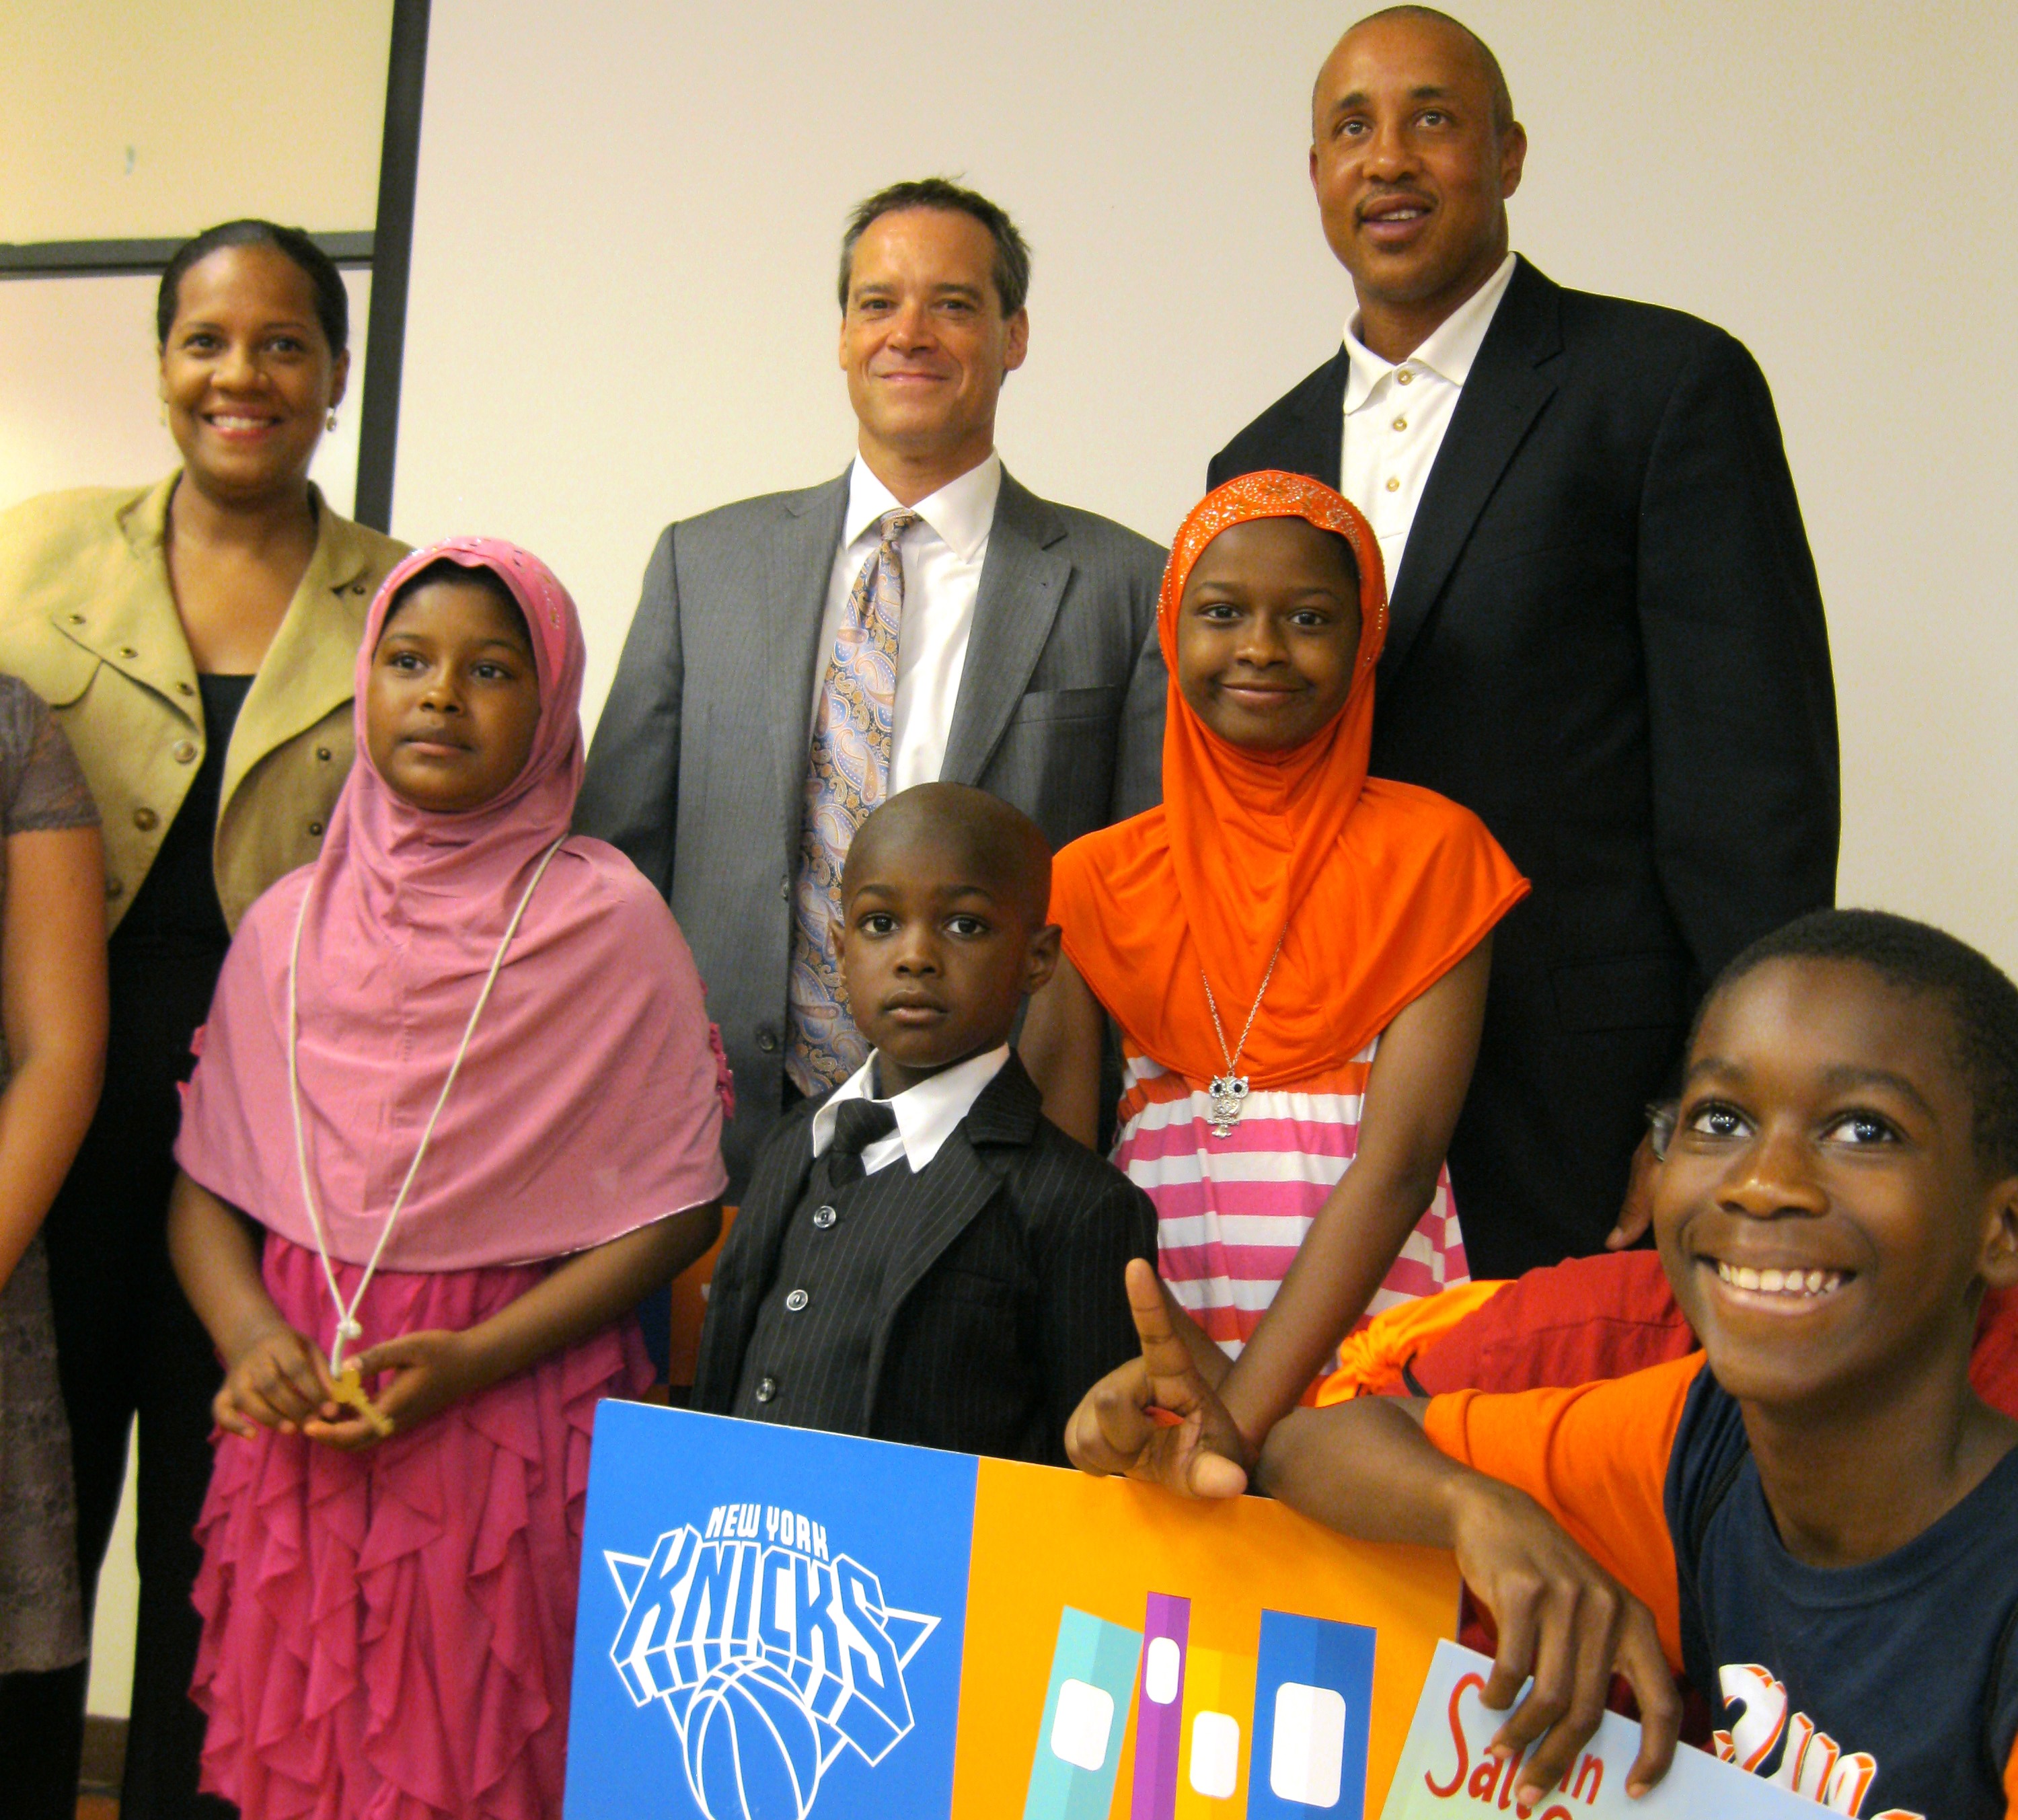 Legendary Knicks shooting guard John Starks (top right) visited the Queens Library at LeFrak City on Aug. 11 as part of the 9th annual “Knicks Read to Achieve” summer reading program.